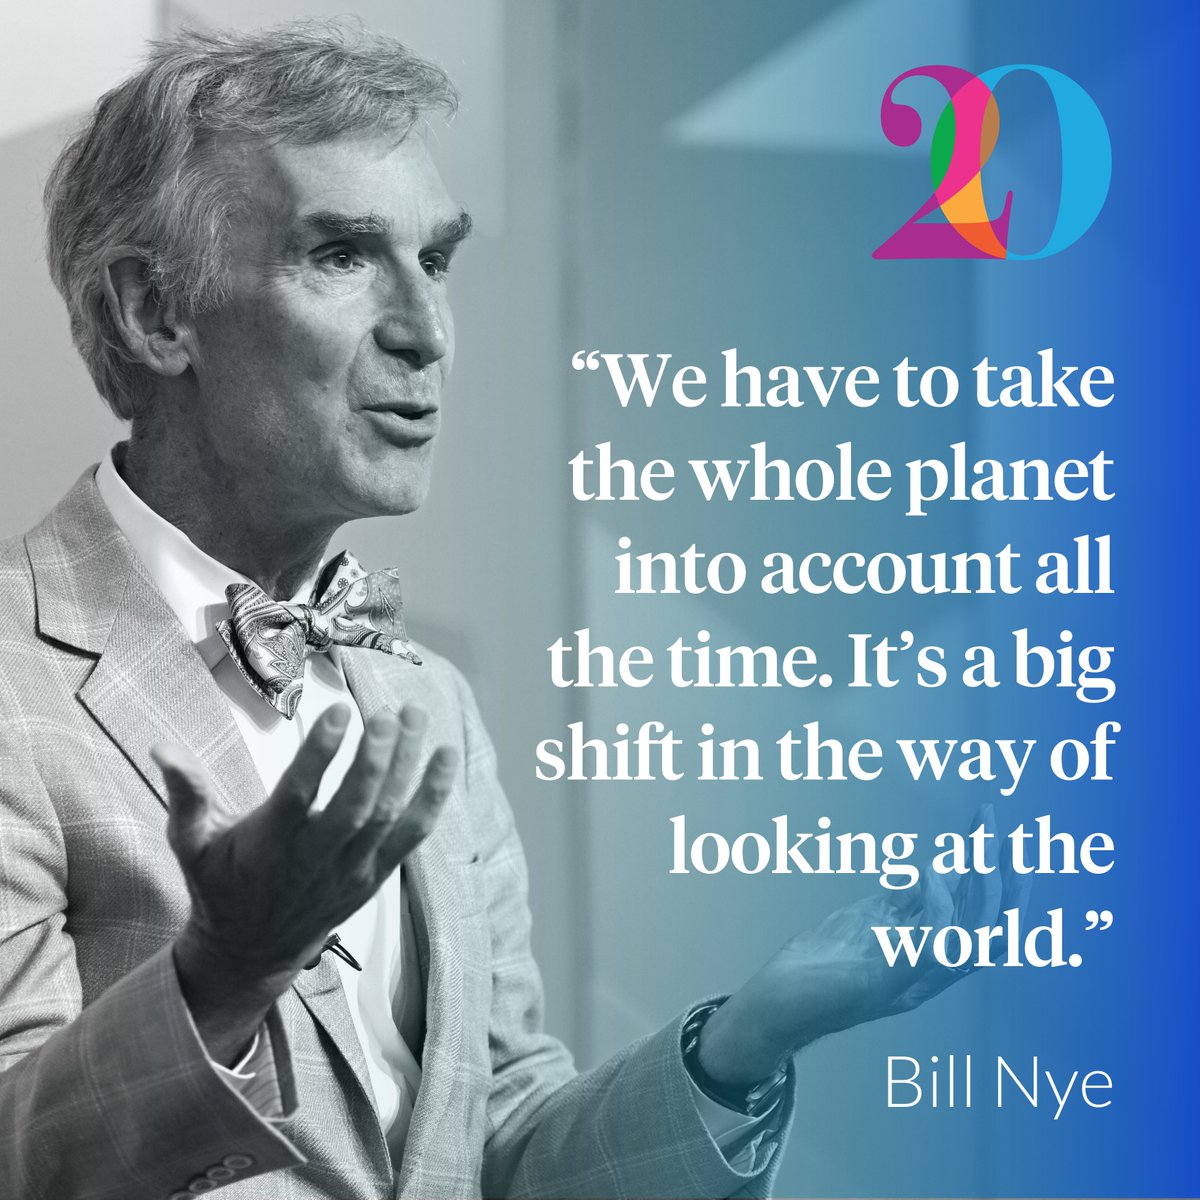 Happy Earth Day! 🌎 Today we’re looking back on a conversation with @BillNye. What gives the Science Guy hope when it comes to our environmental future? And what’s the one thing he encourages us all to do to address climate change? Learn more: bit.ly/3UdiGxt